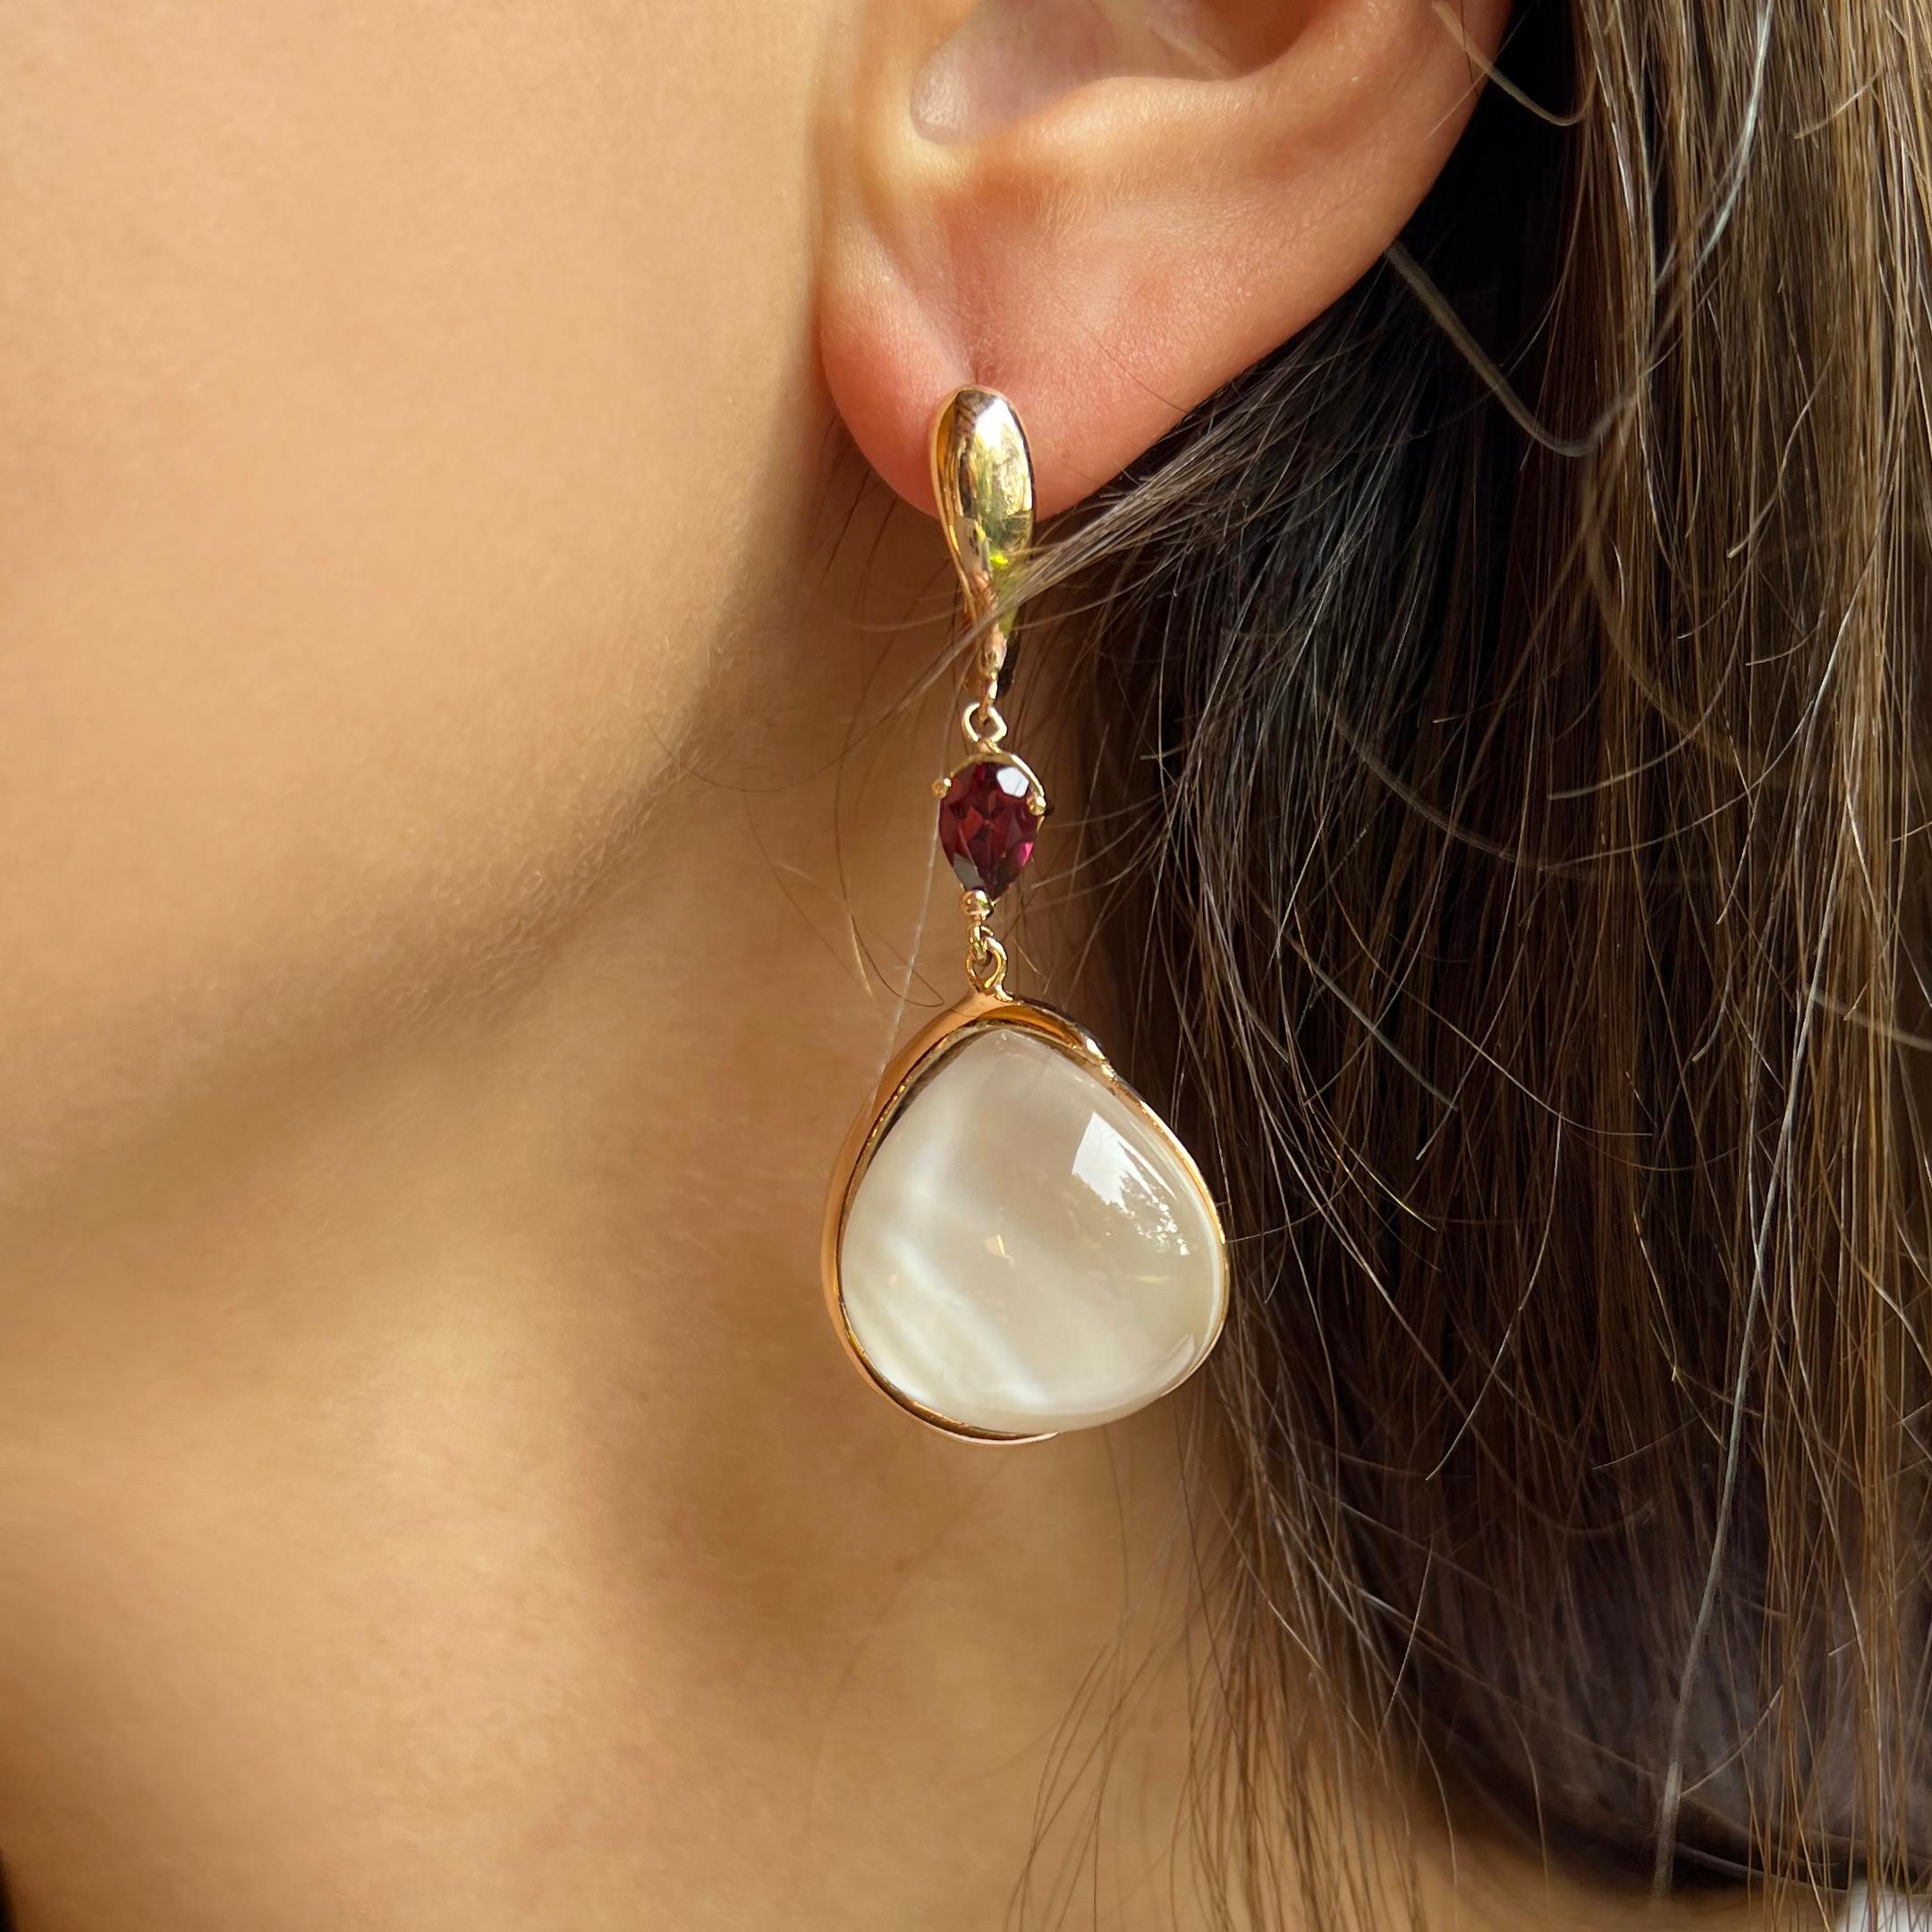 modern earrings, comfortable to wear with trendy stone, MotherofPearls and Tourmaline 
18Kt Rose Gold with Pink Tourmaline MotherofPearl Fashion Drop Earrings 



 All Stanoppi Jewelry is new and has never been previously owned or worn. Each item